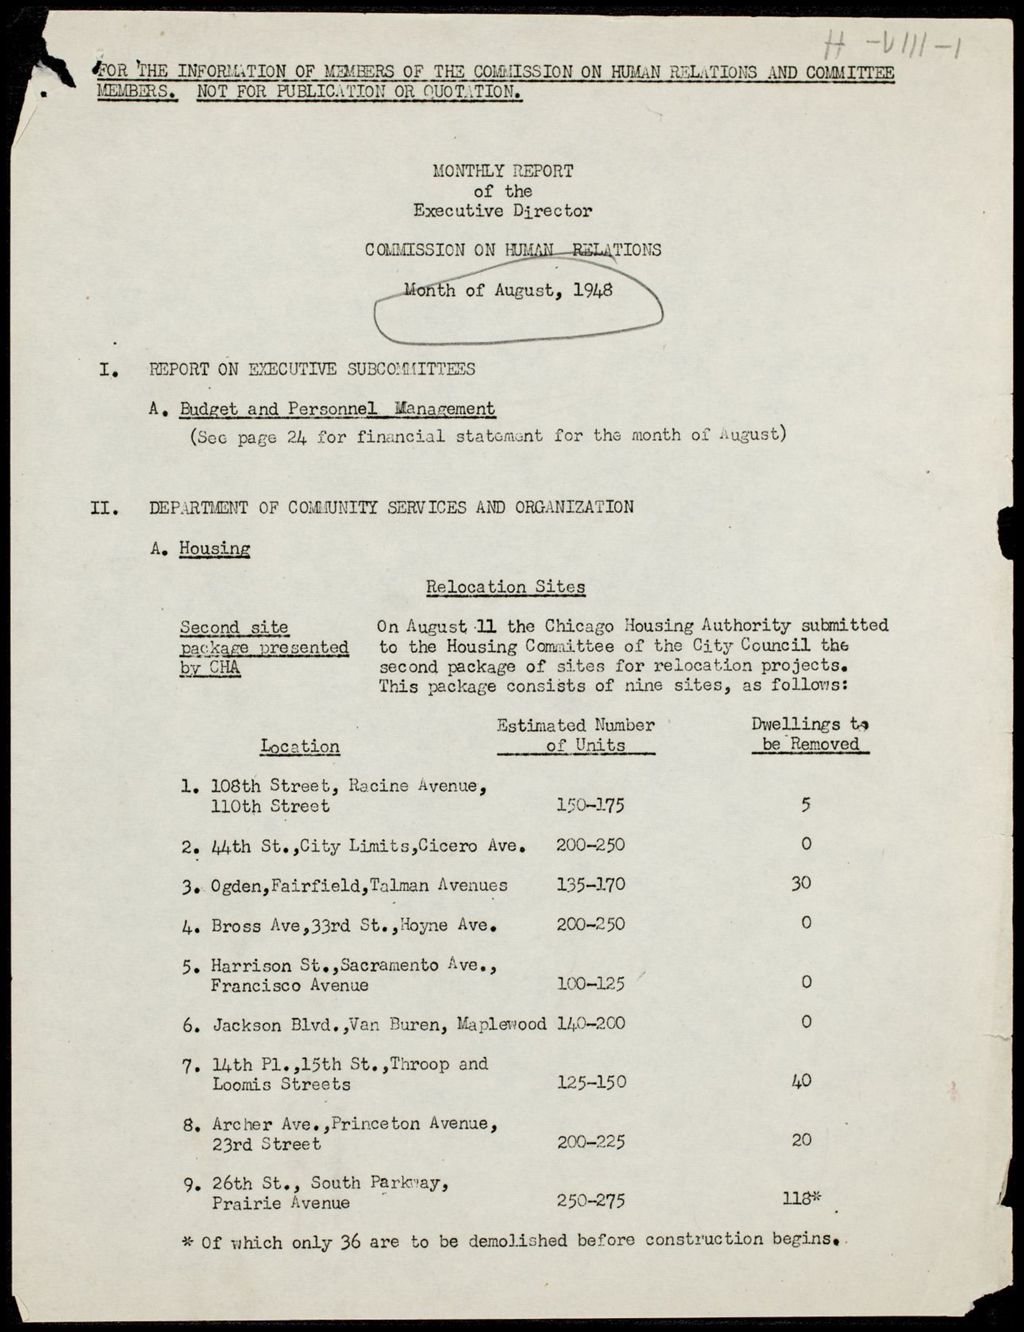 Miniature of Chicago Commission on Human Relations Executive Director reports, 1948-1949 (Folder I-2788)